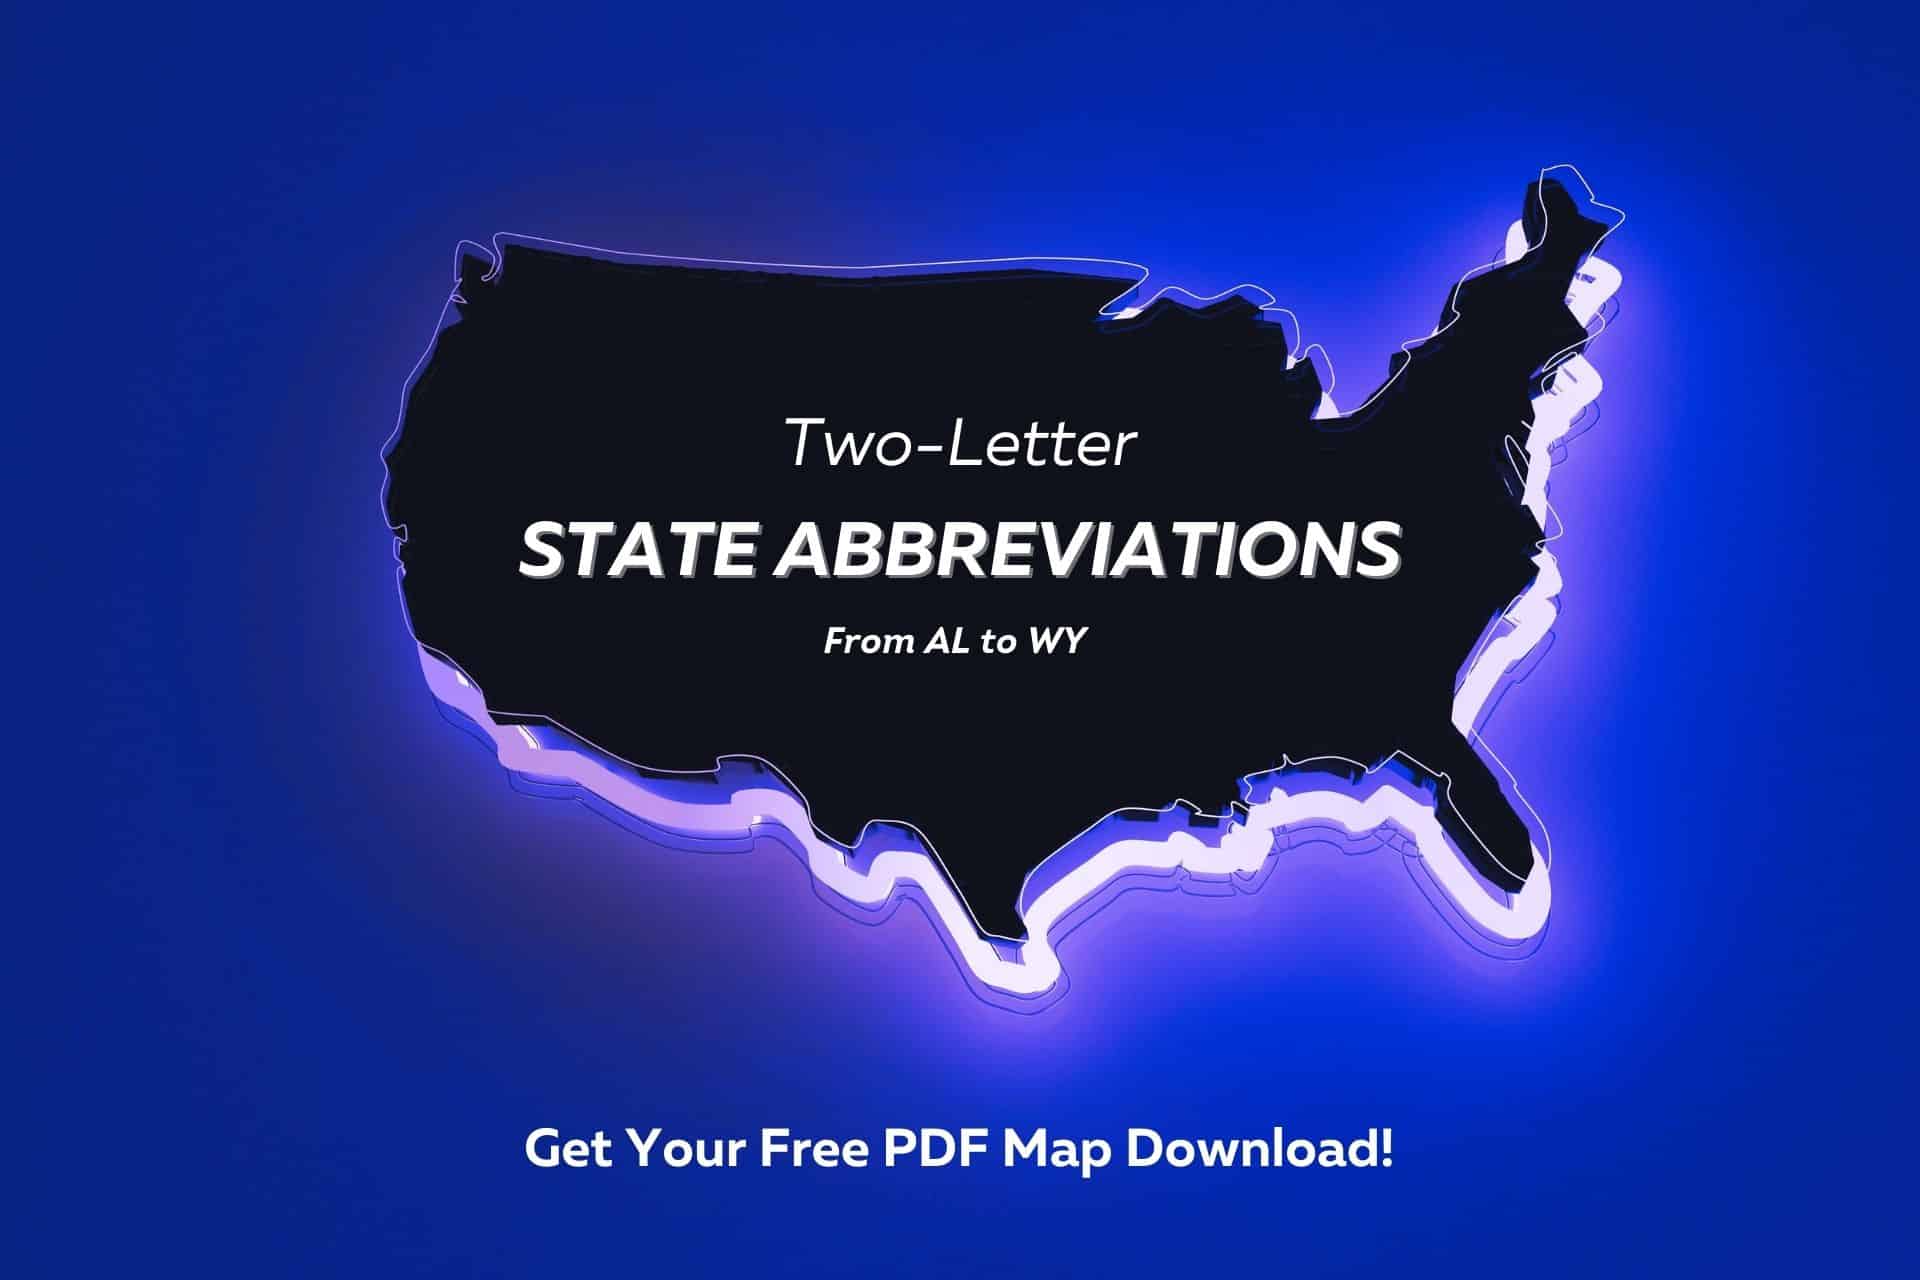 Two-Letter states abbreviations map